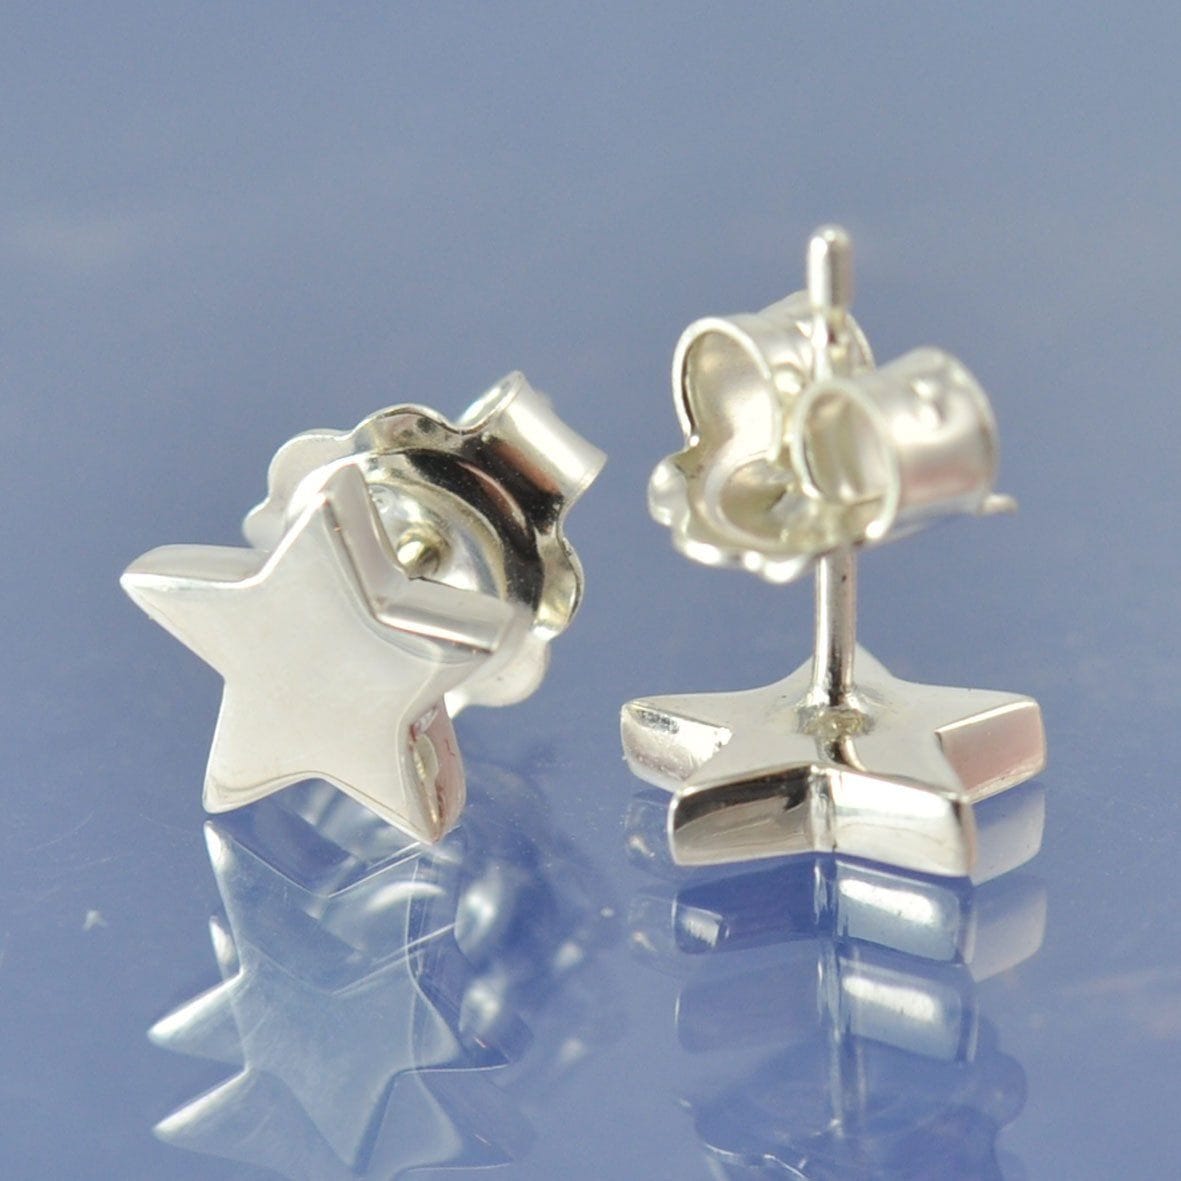 Star Studs Earring by Chris Parry Jewellery